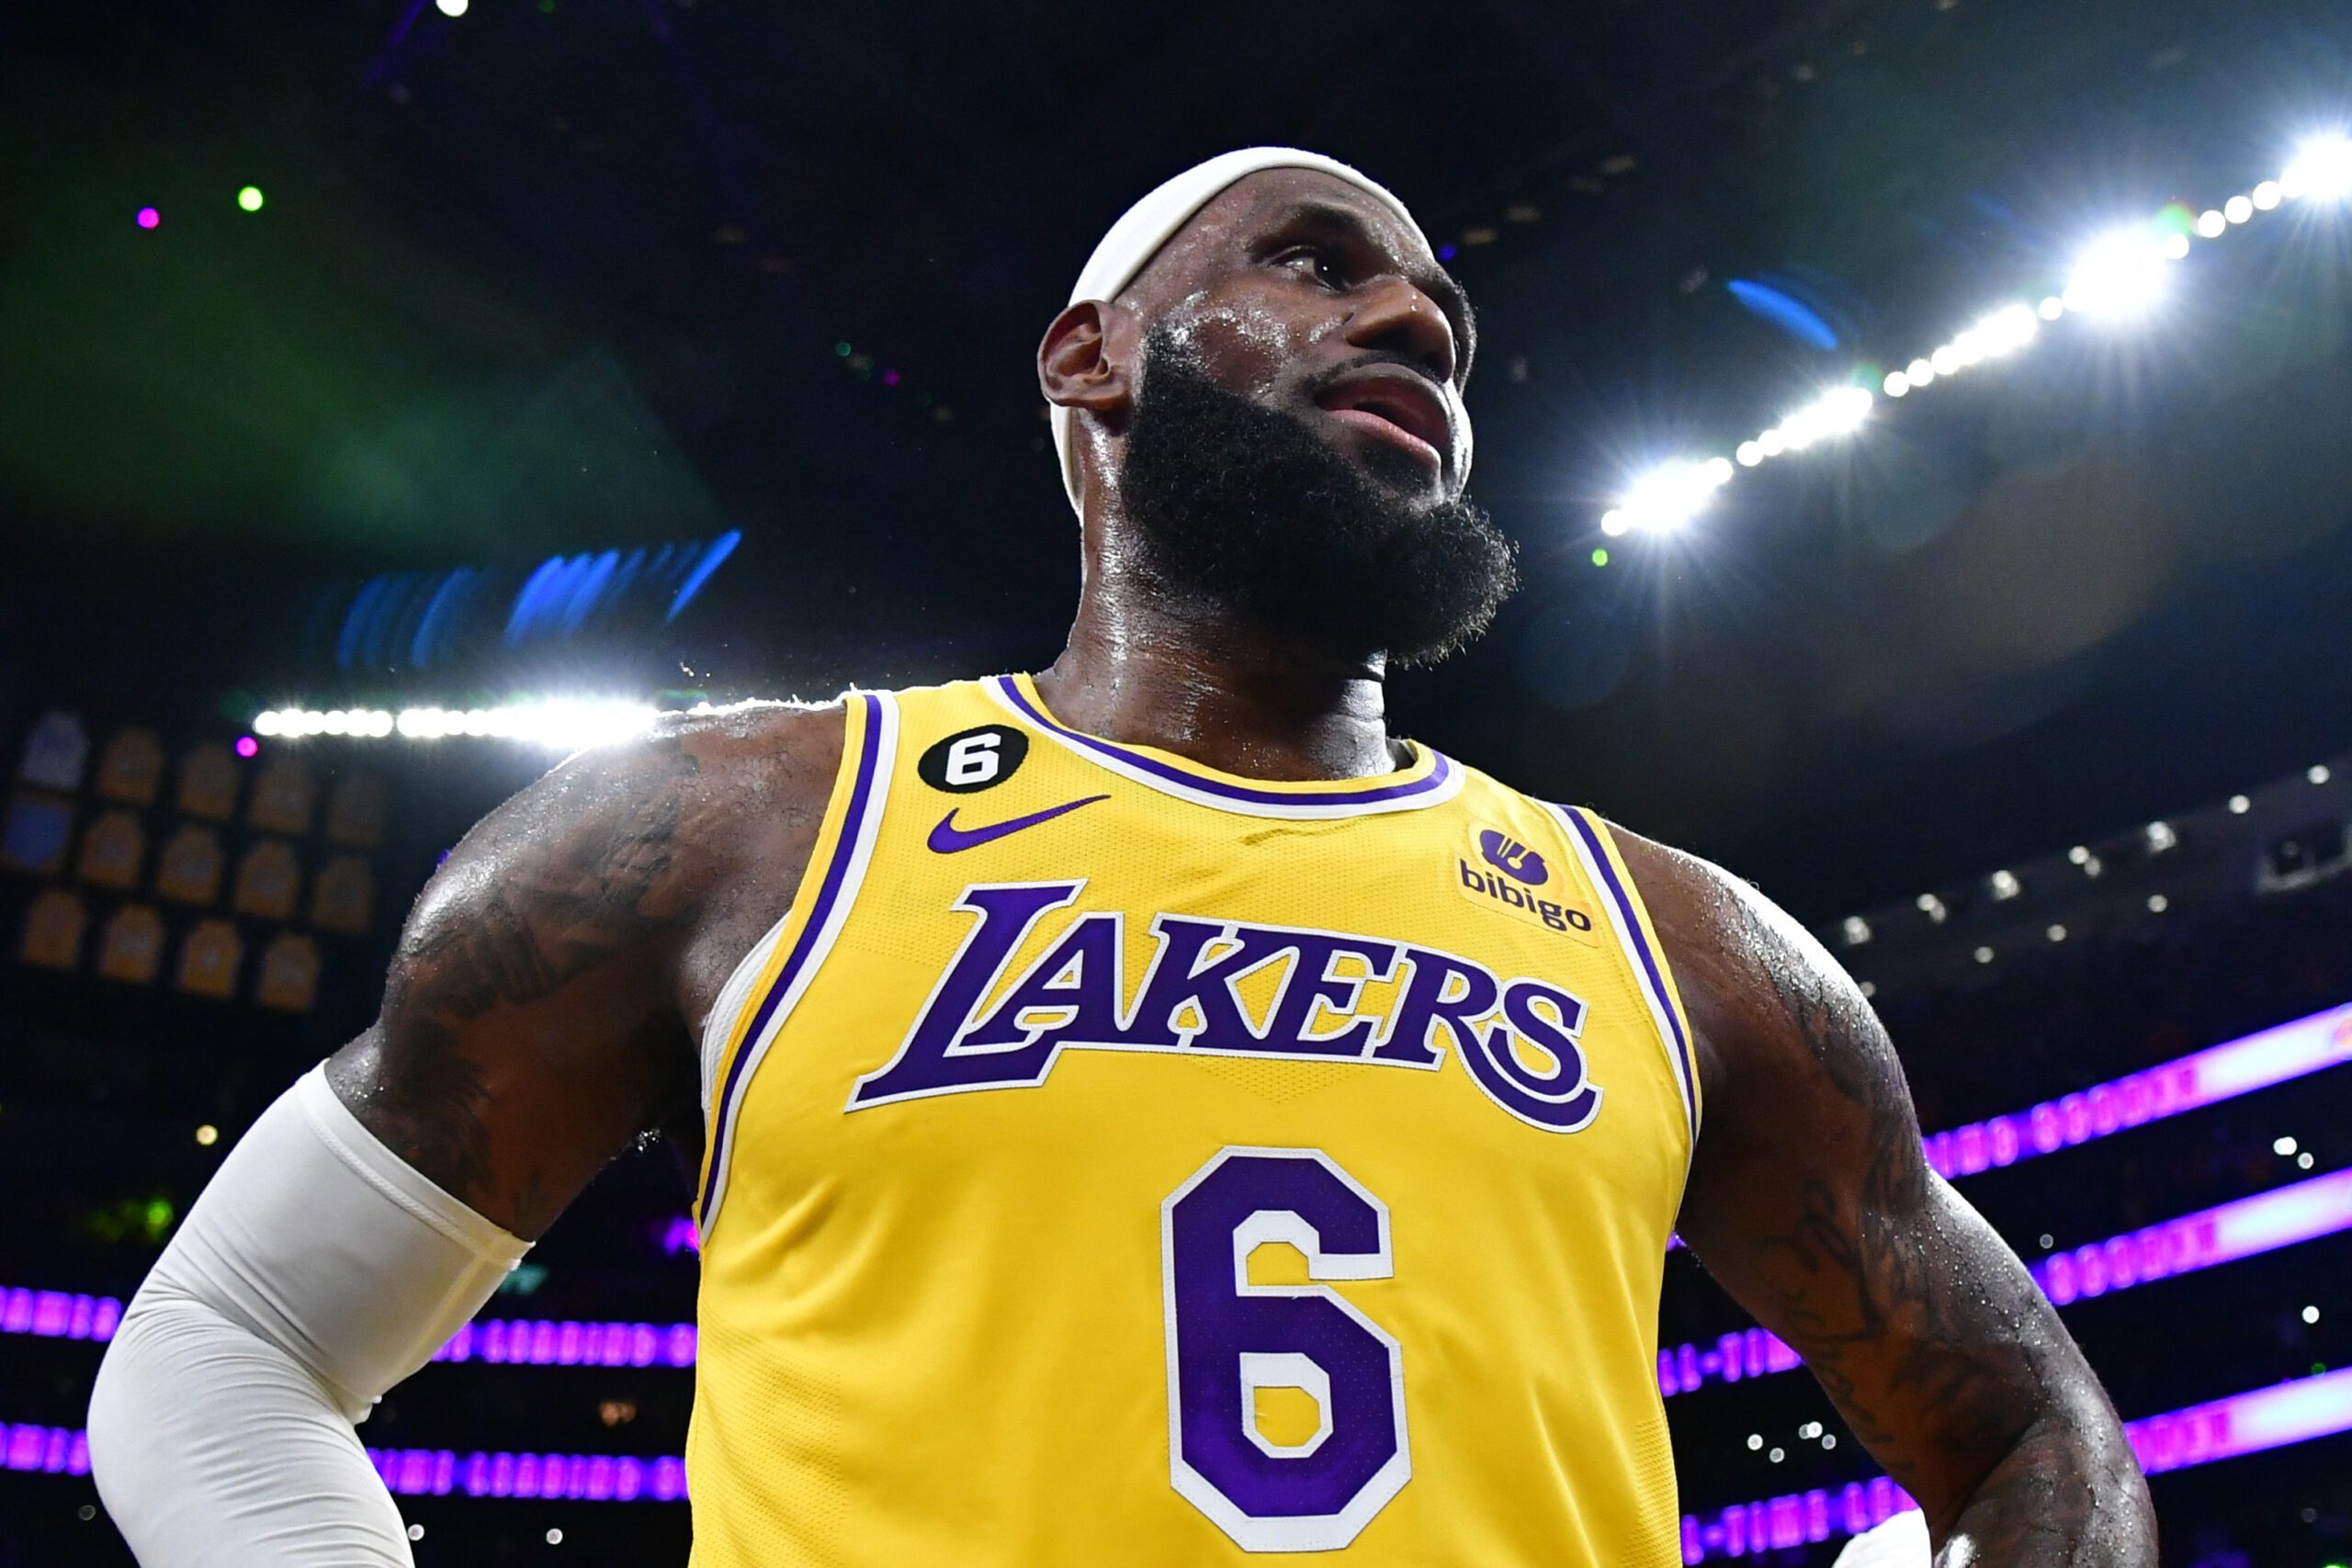 LeBron James is changing his jersey back to No. 23 next season in